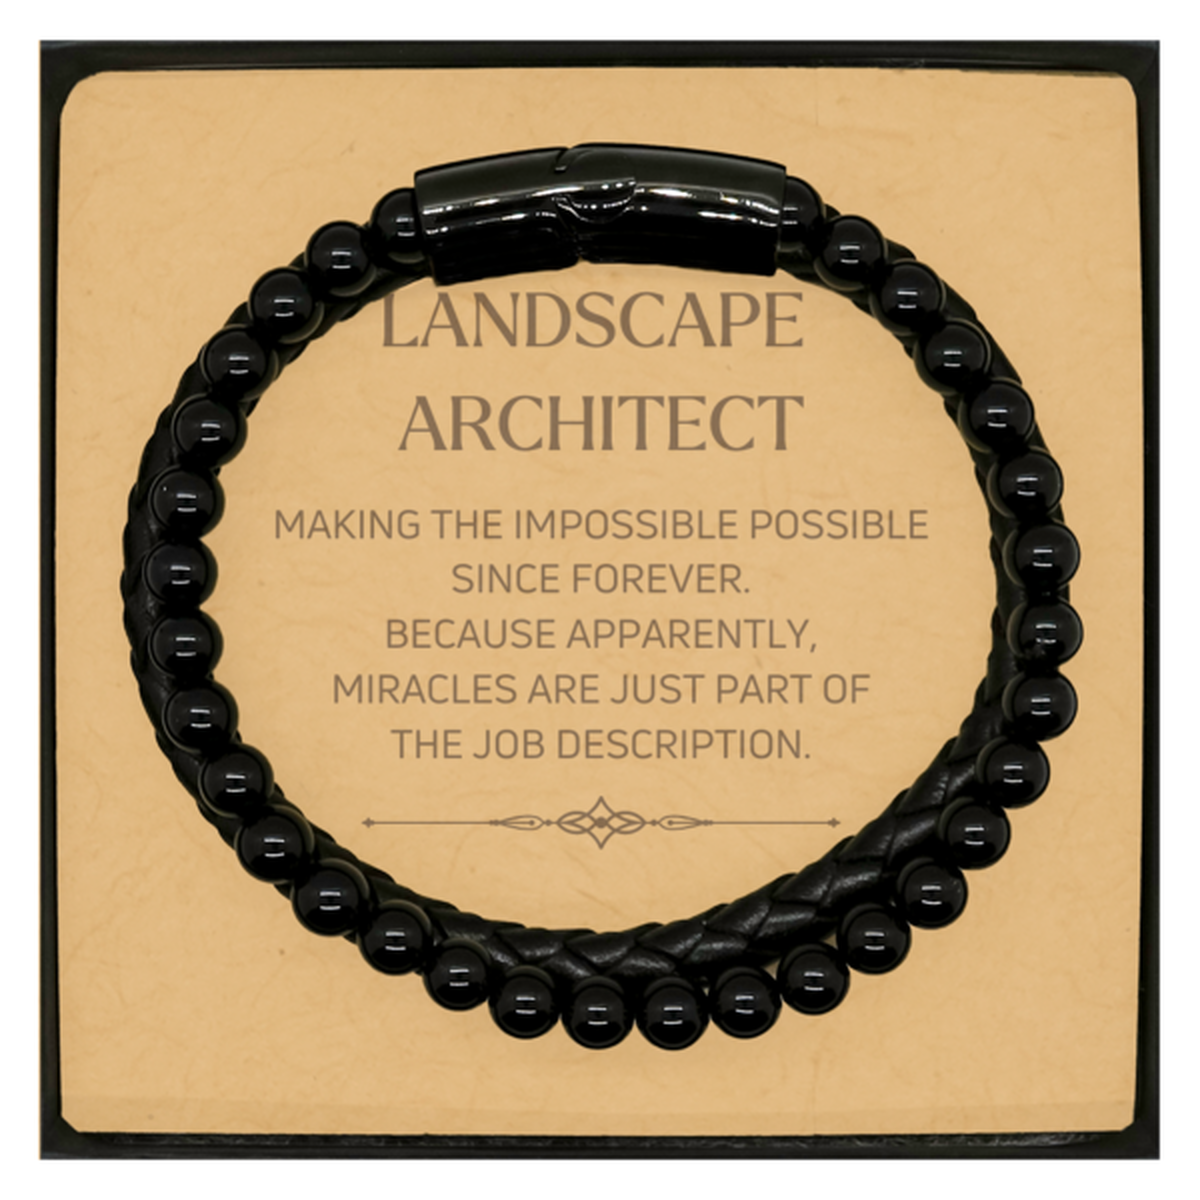 Funny Landscape Architect Gifts, Miracles are just part of the job description, Inspirational Birthday Christmas Stone Leather Bracelets For Landscape Architect, Men, Women, Coworkers, Friends, Boss